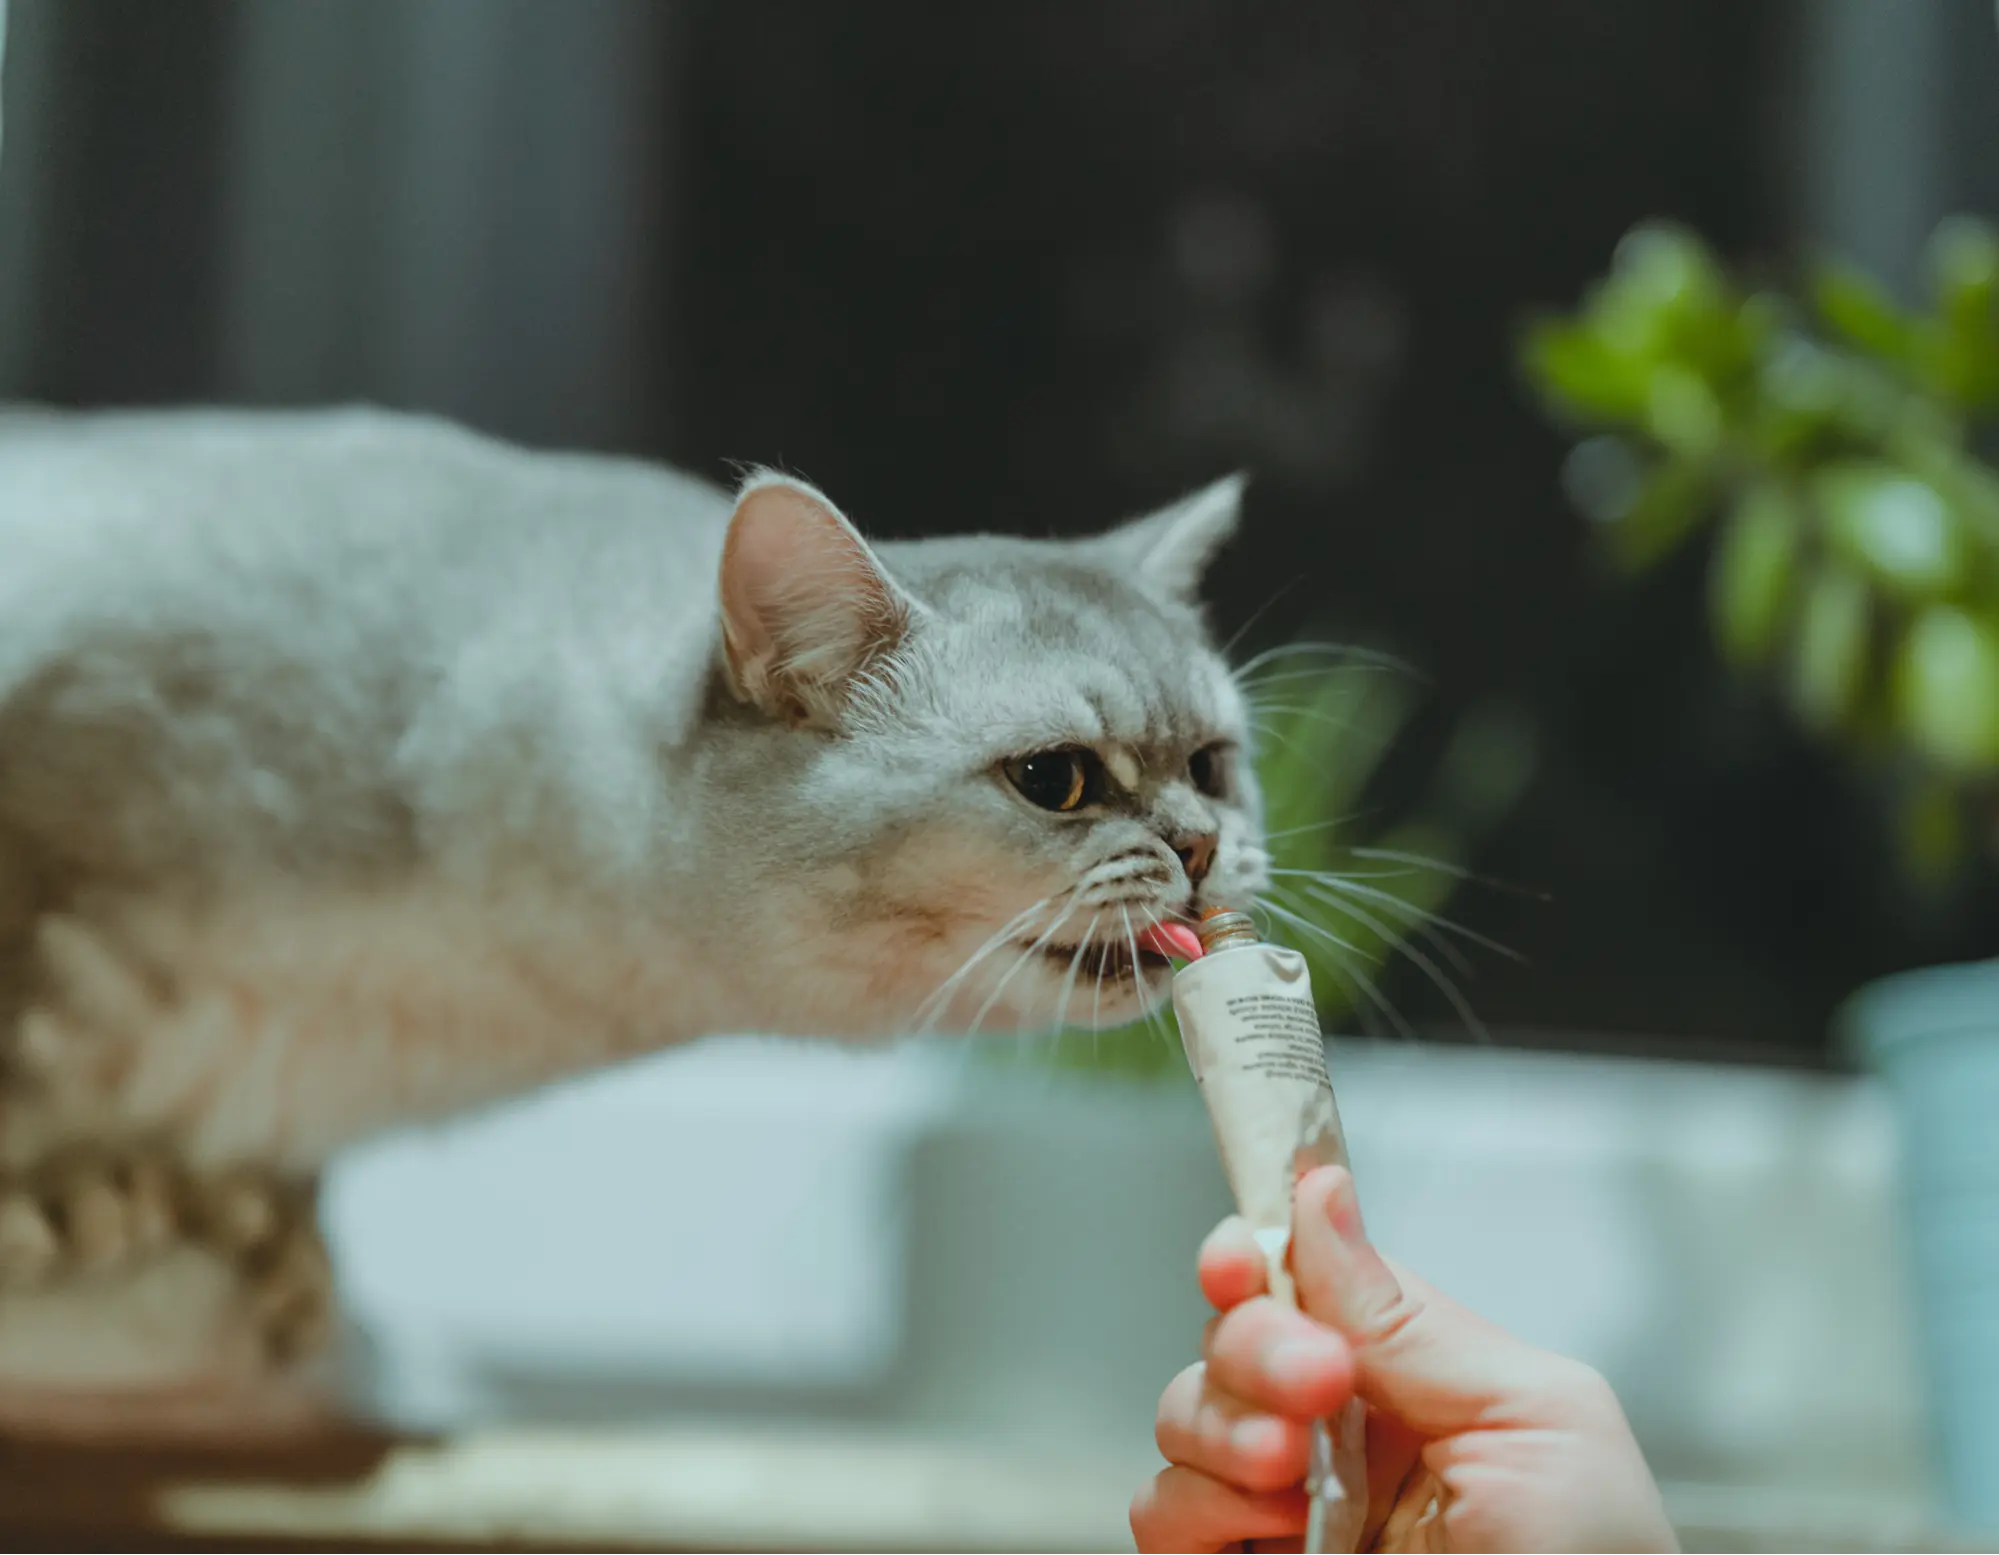 grey cat licking a cat yoghurt that a person is holding